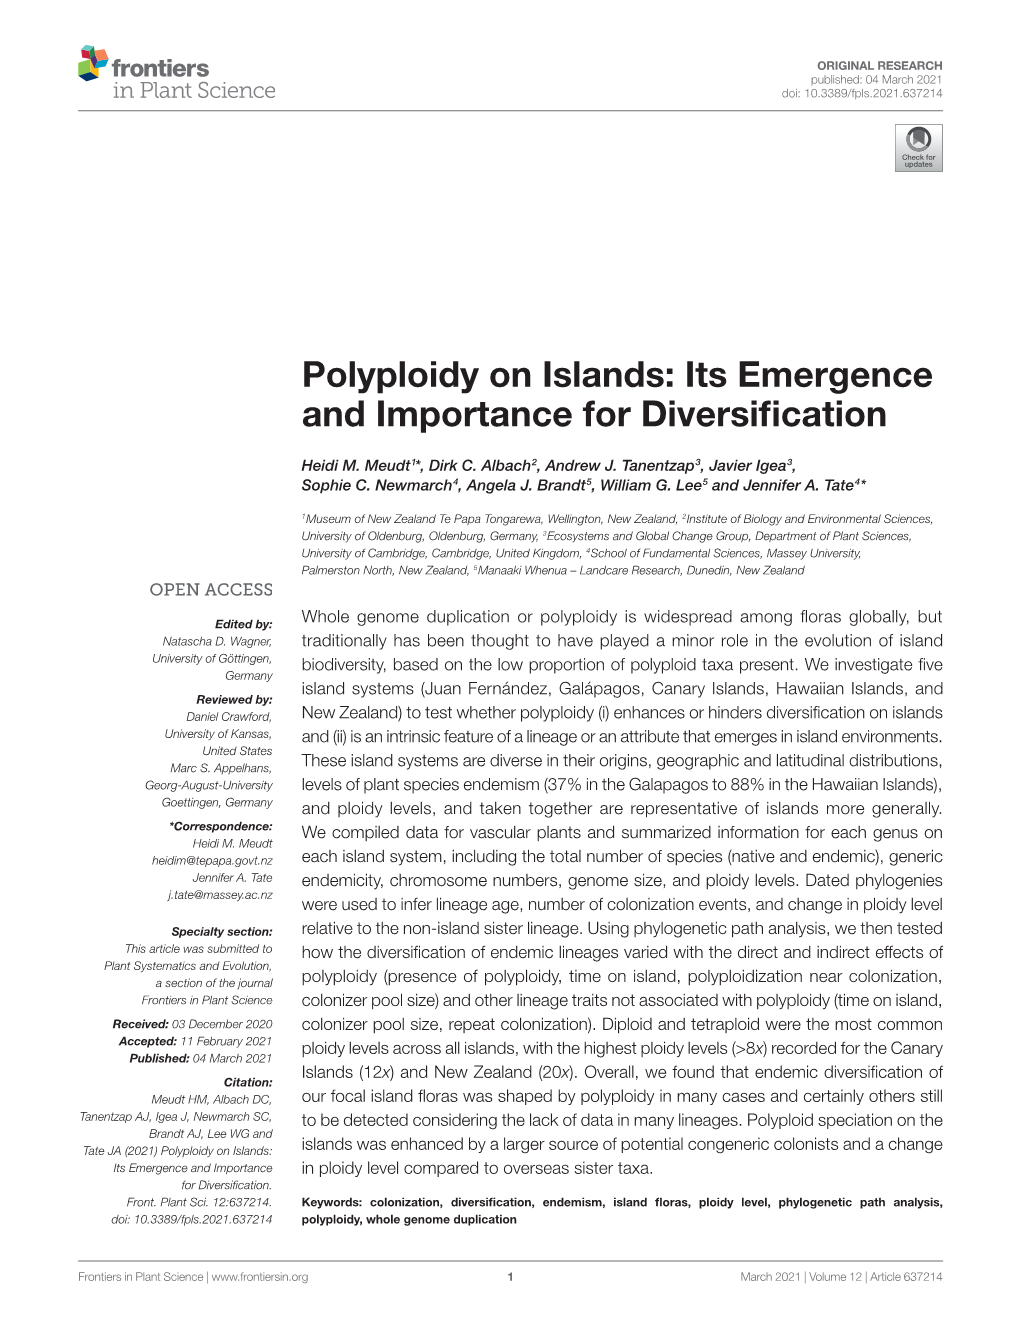 Polyploidy on Islands: Its Emergence and Importance for Diversification